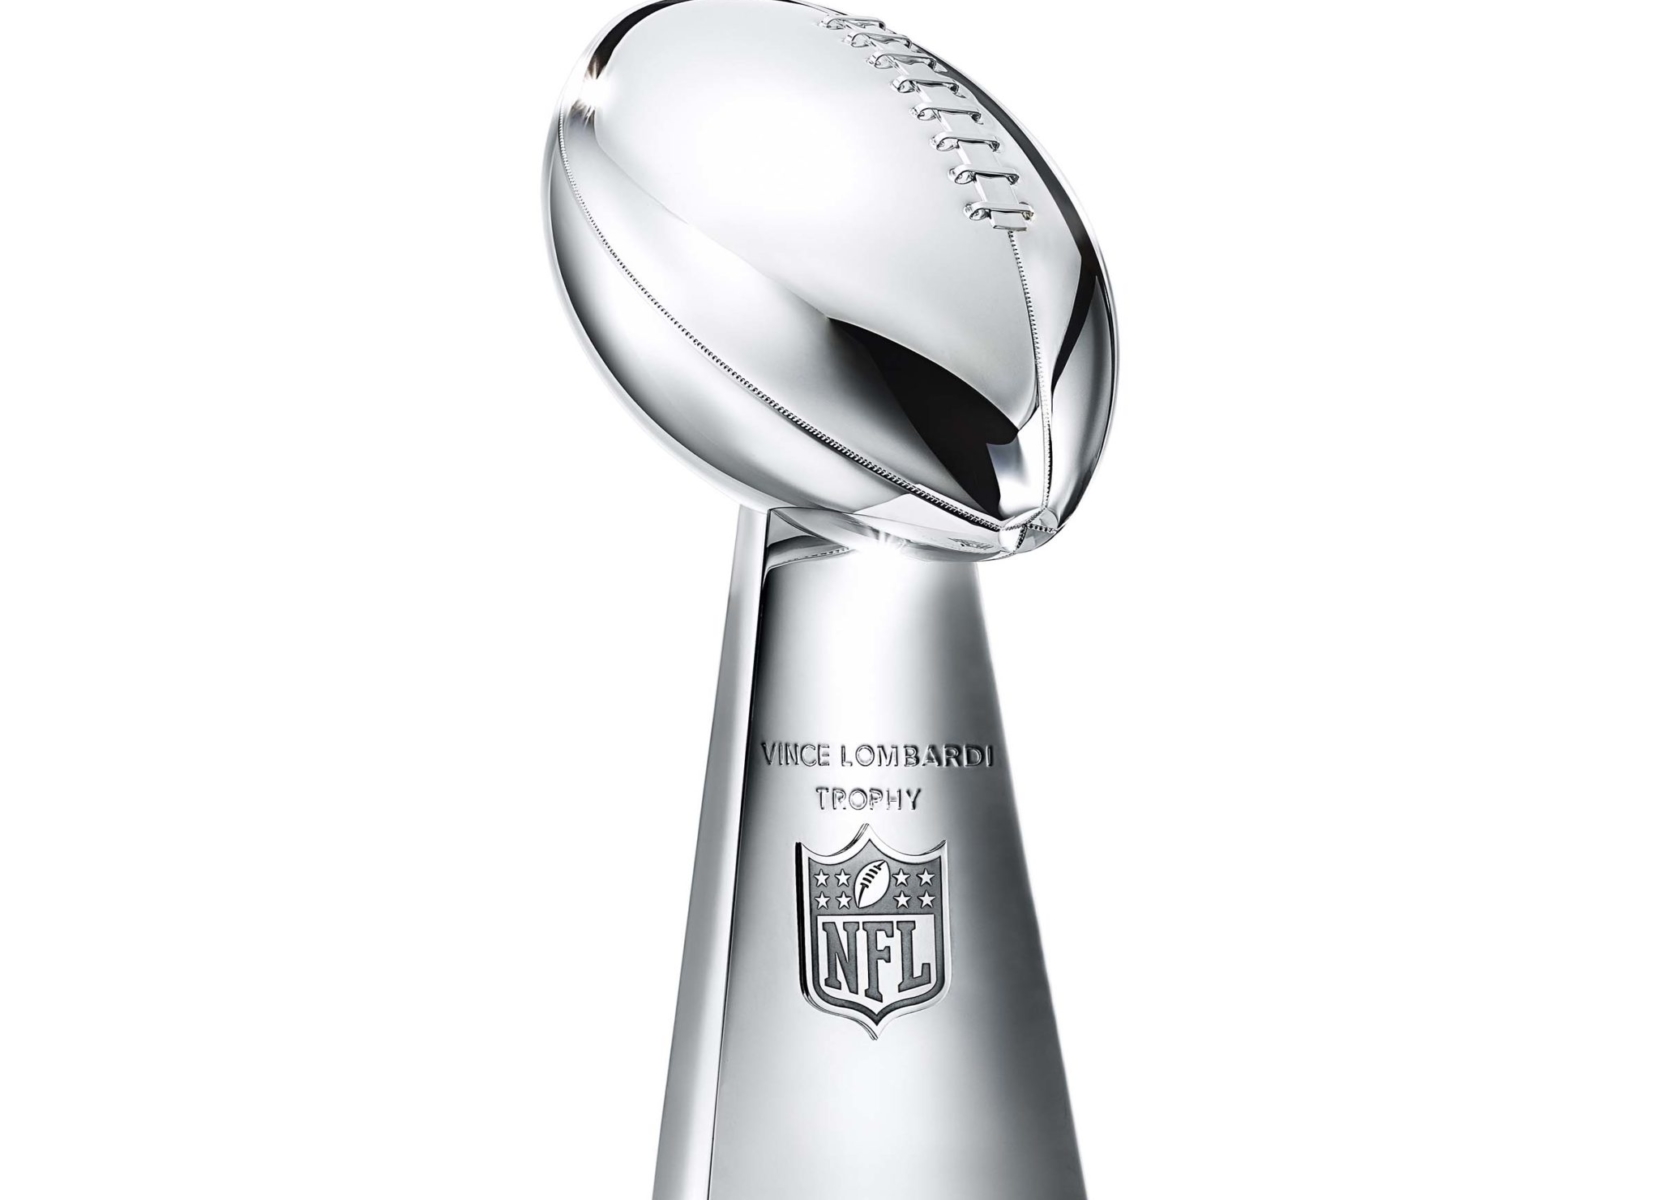 Tiffany & Co. Debuts This Year’s Vince Lombardi Trophy for Super Bowl